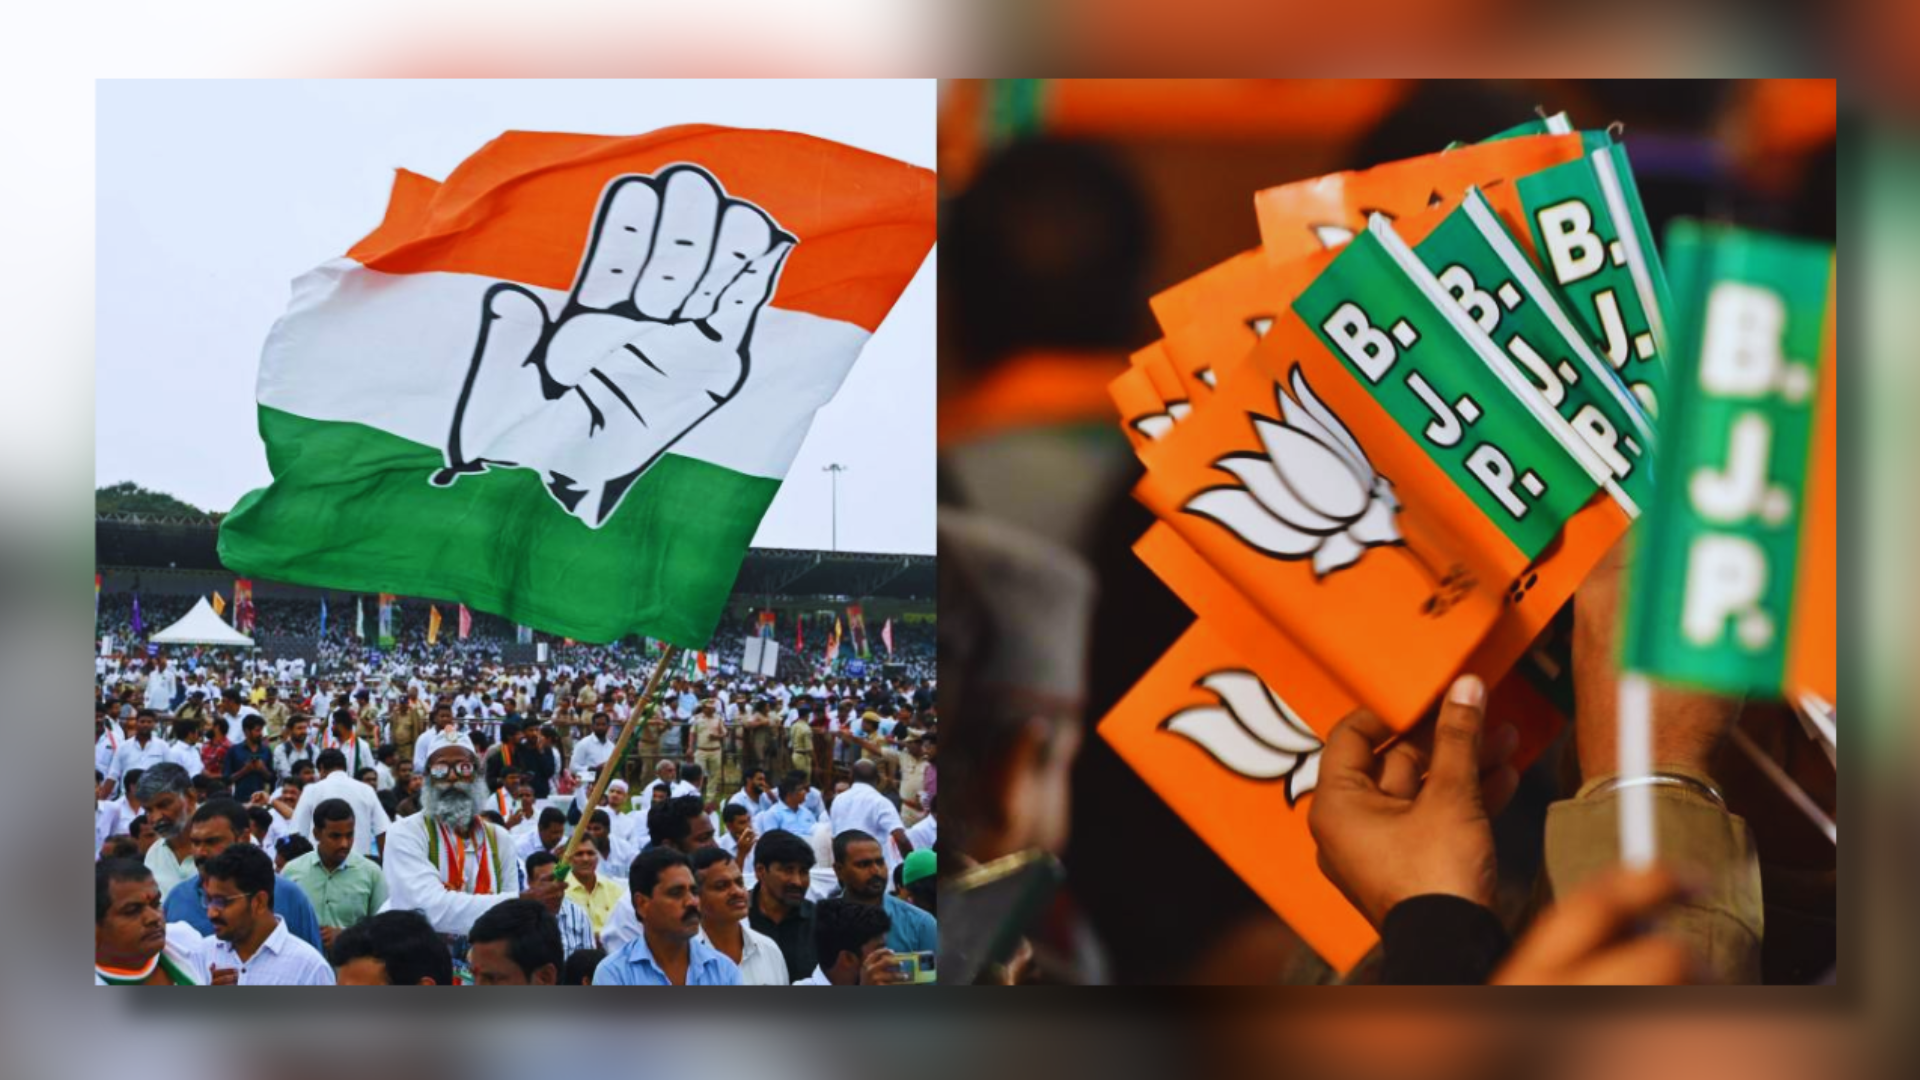 A Shifting Political Landscape: Congress Sees Declining Seat Contestation Trend Over the Years, Exclusive Debate On NewsX